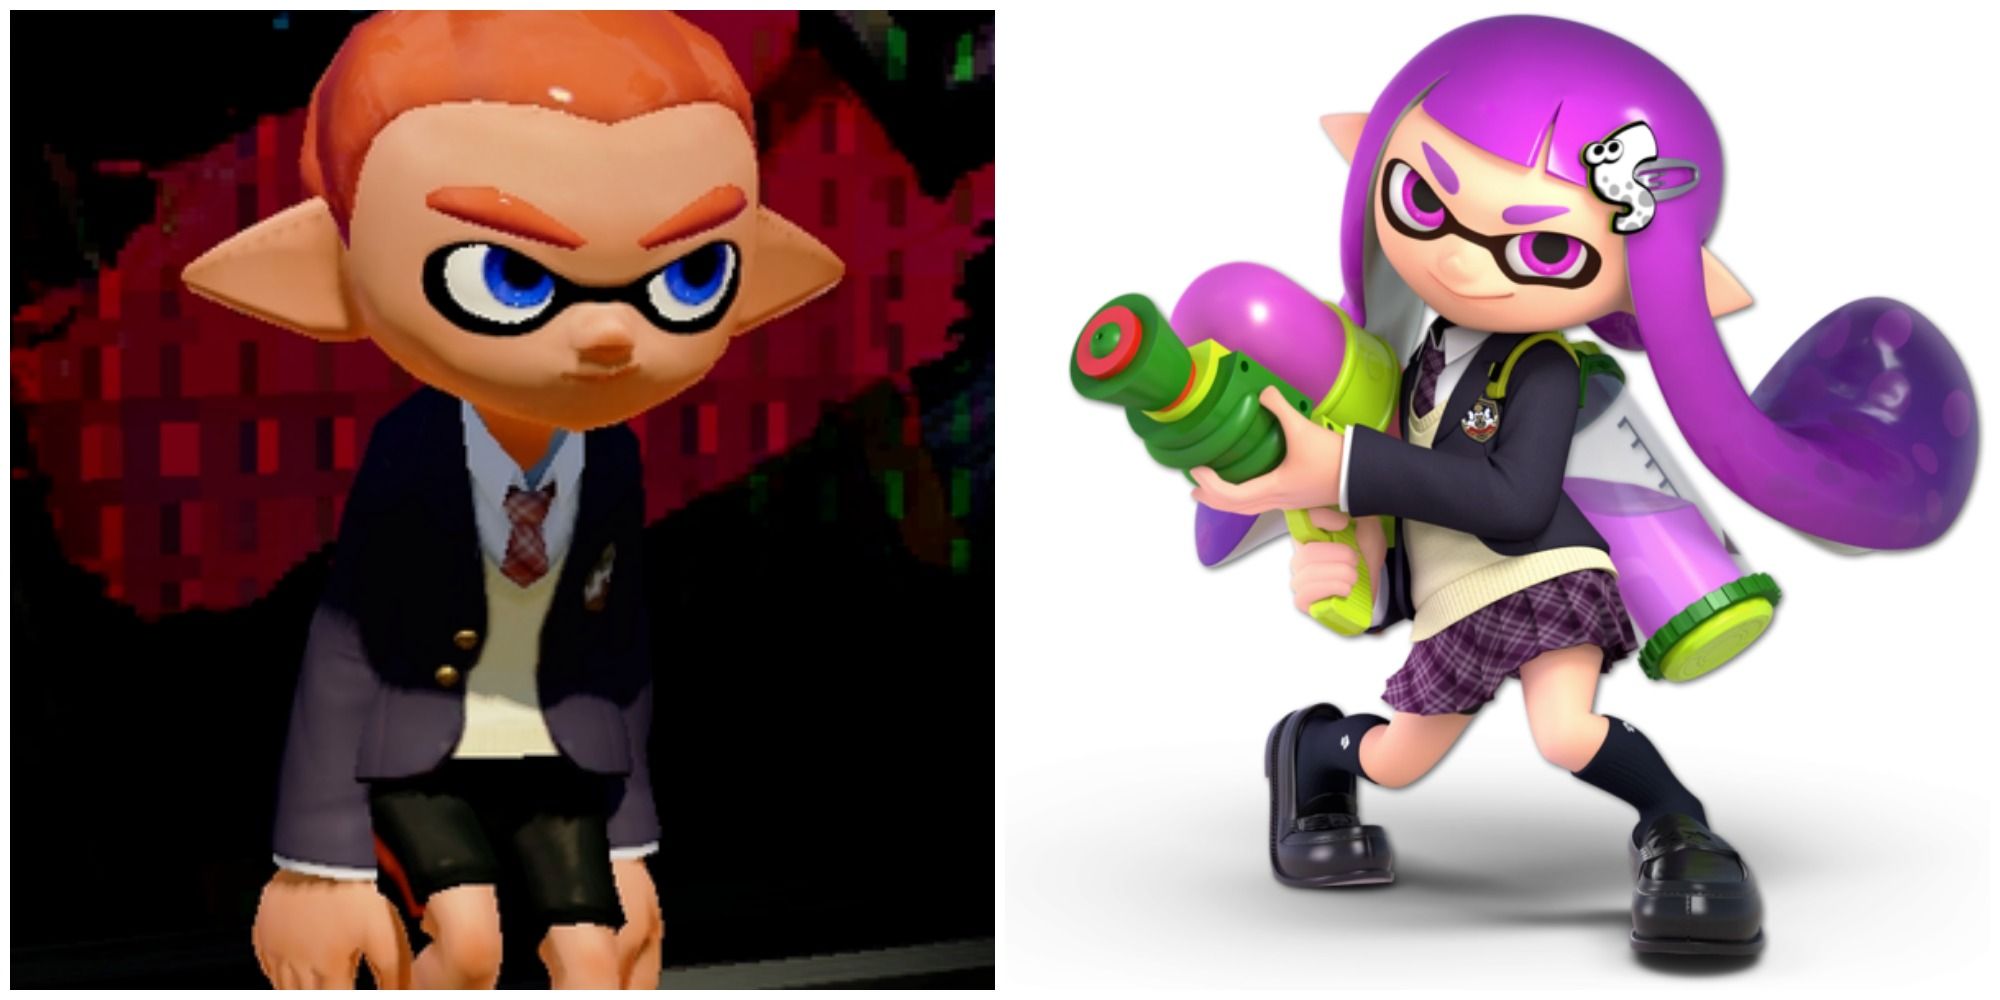 Split image of a male Inkling wearing School Uniform, and a female Inkling wearing School uniform posing with a weapon